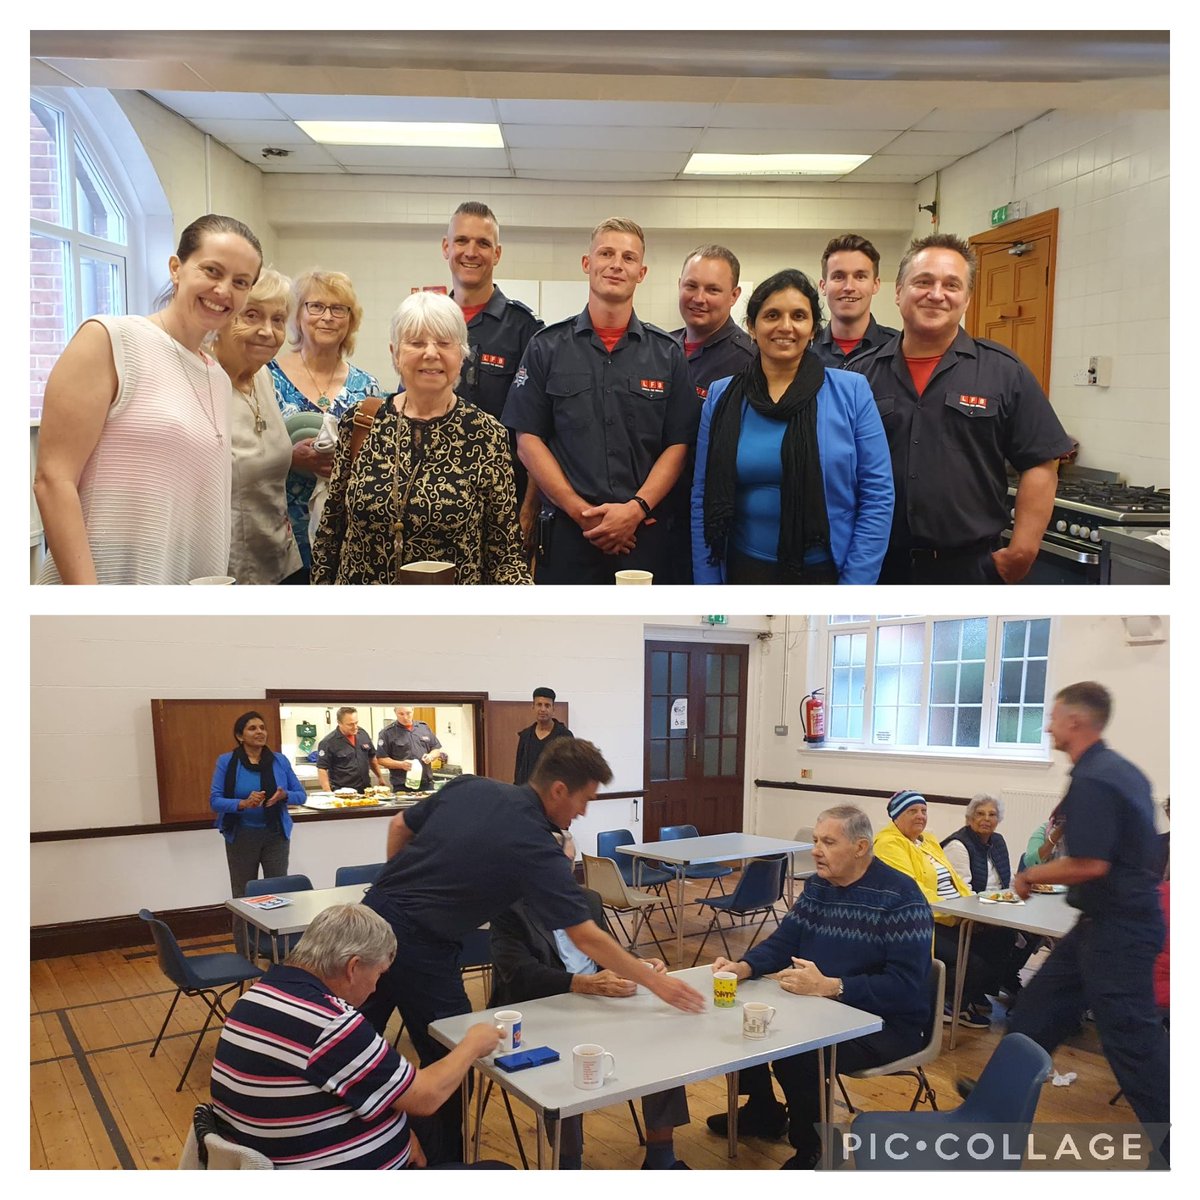 A couple of photos taken during #PurleyFireStation's visit to Coulsdon Methodist Church for #DementiaCafe today in partnership with @MSHFoundations Meeting up with local community groups is a great way to get information across and build relationships. #collaboration #firesafety